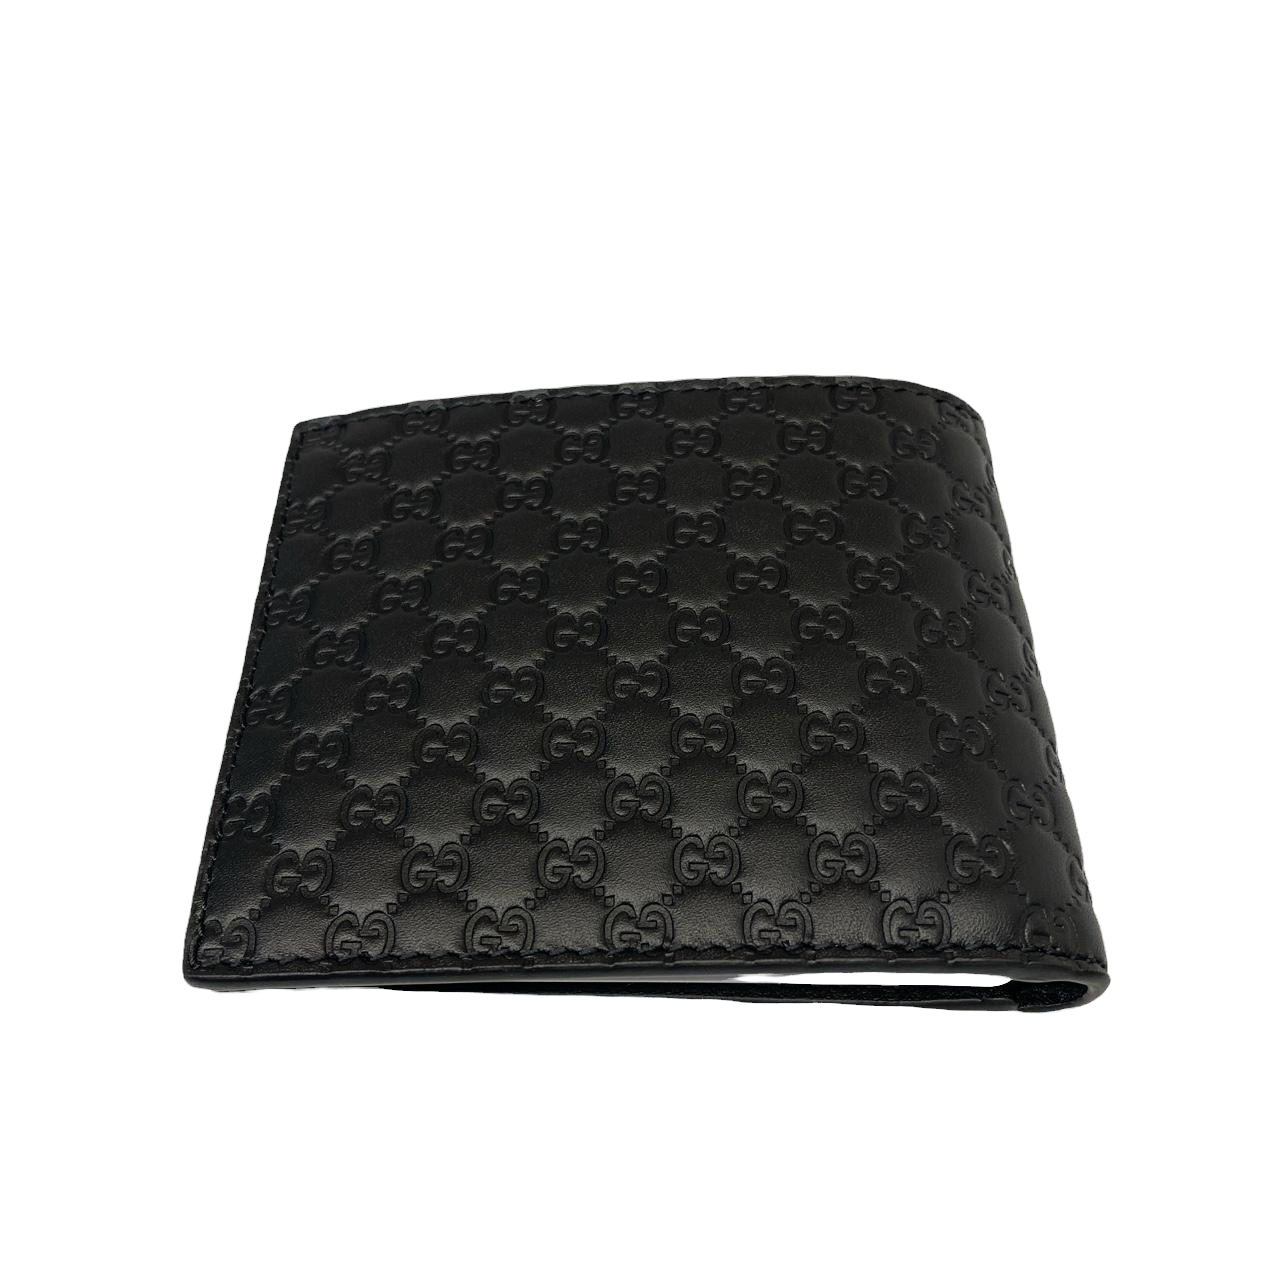 GG embossed coin wallet in Black Leather